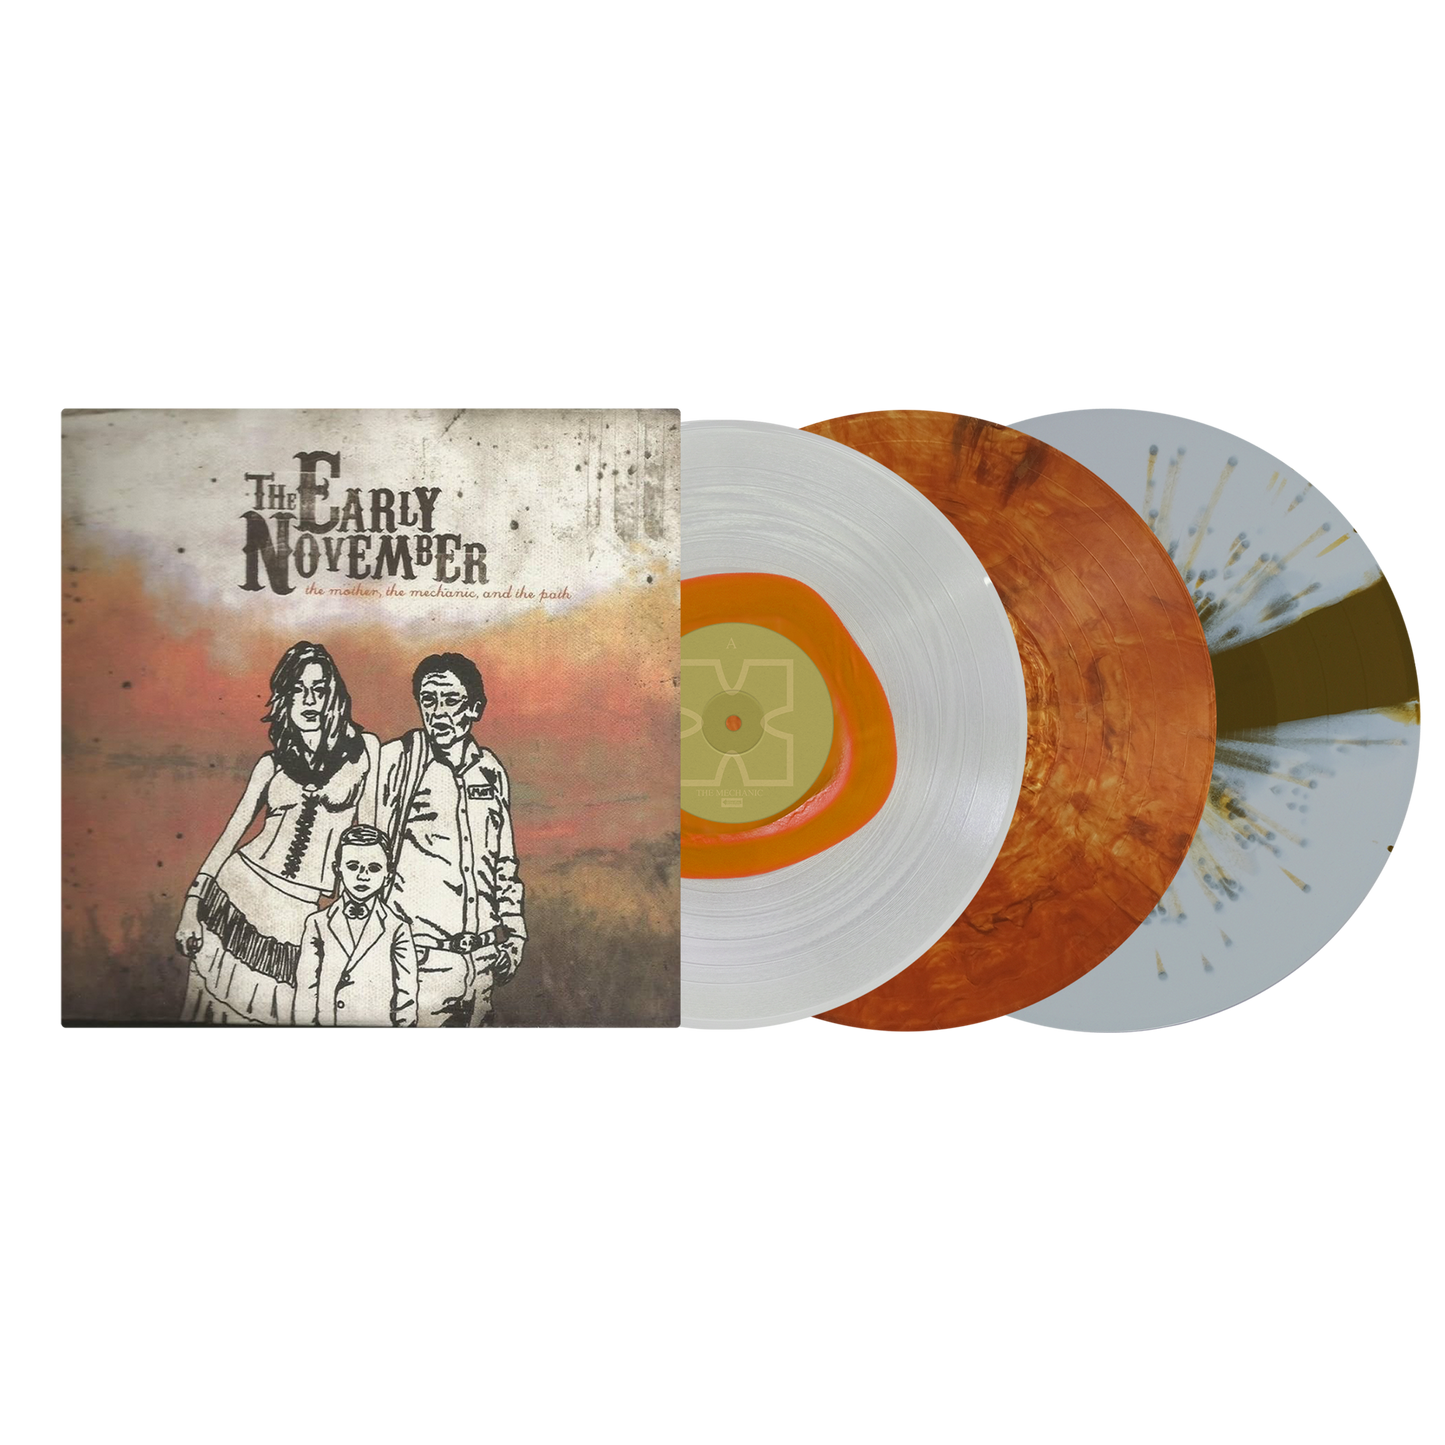 The Early November - “The Mother, The Mechanic, The Path” Vinyl